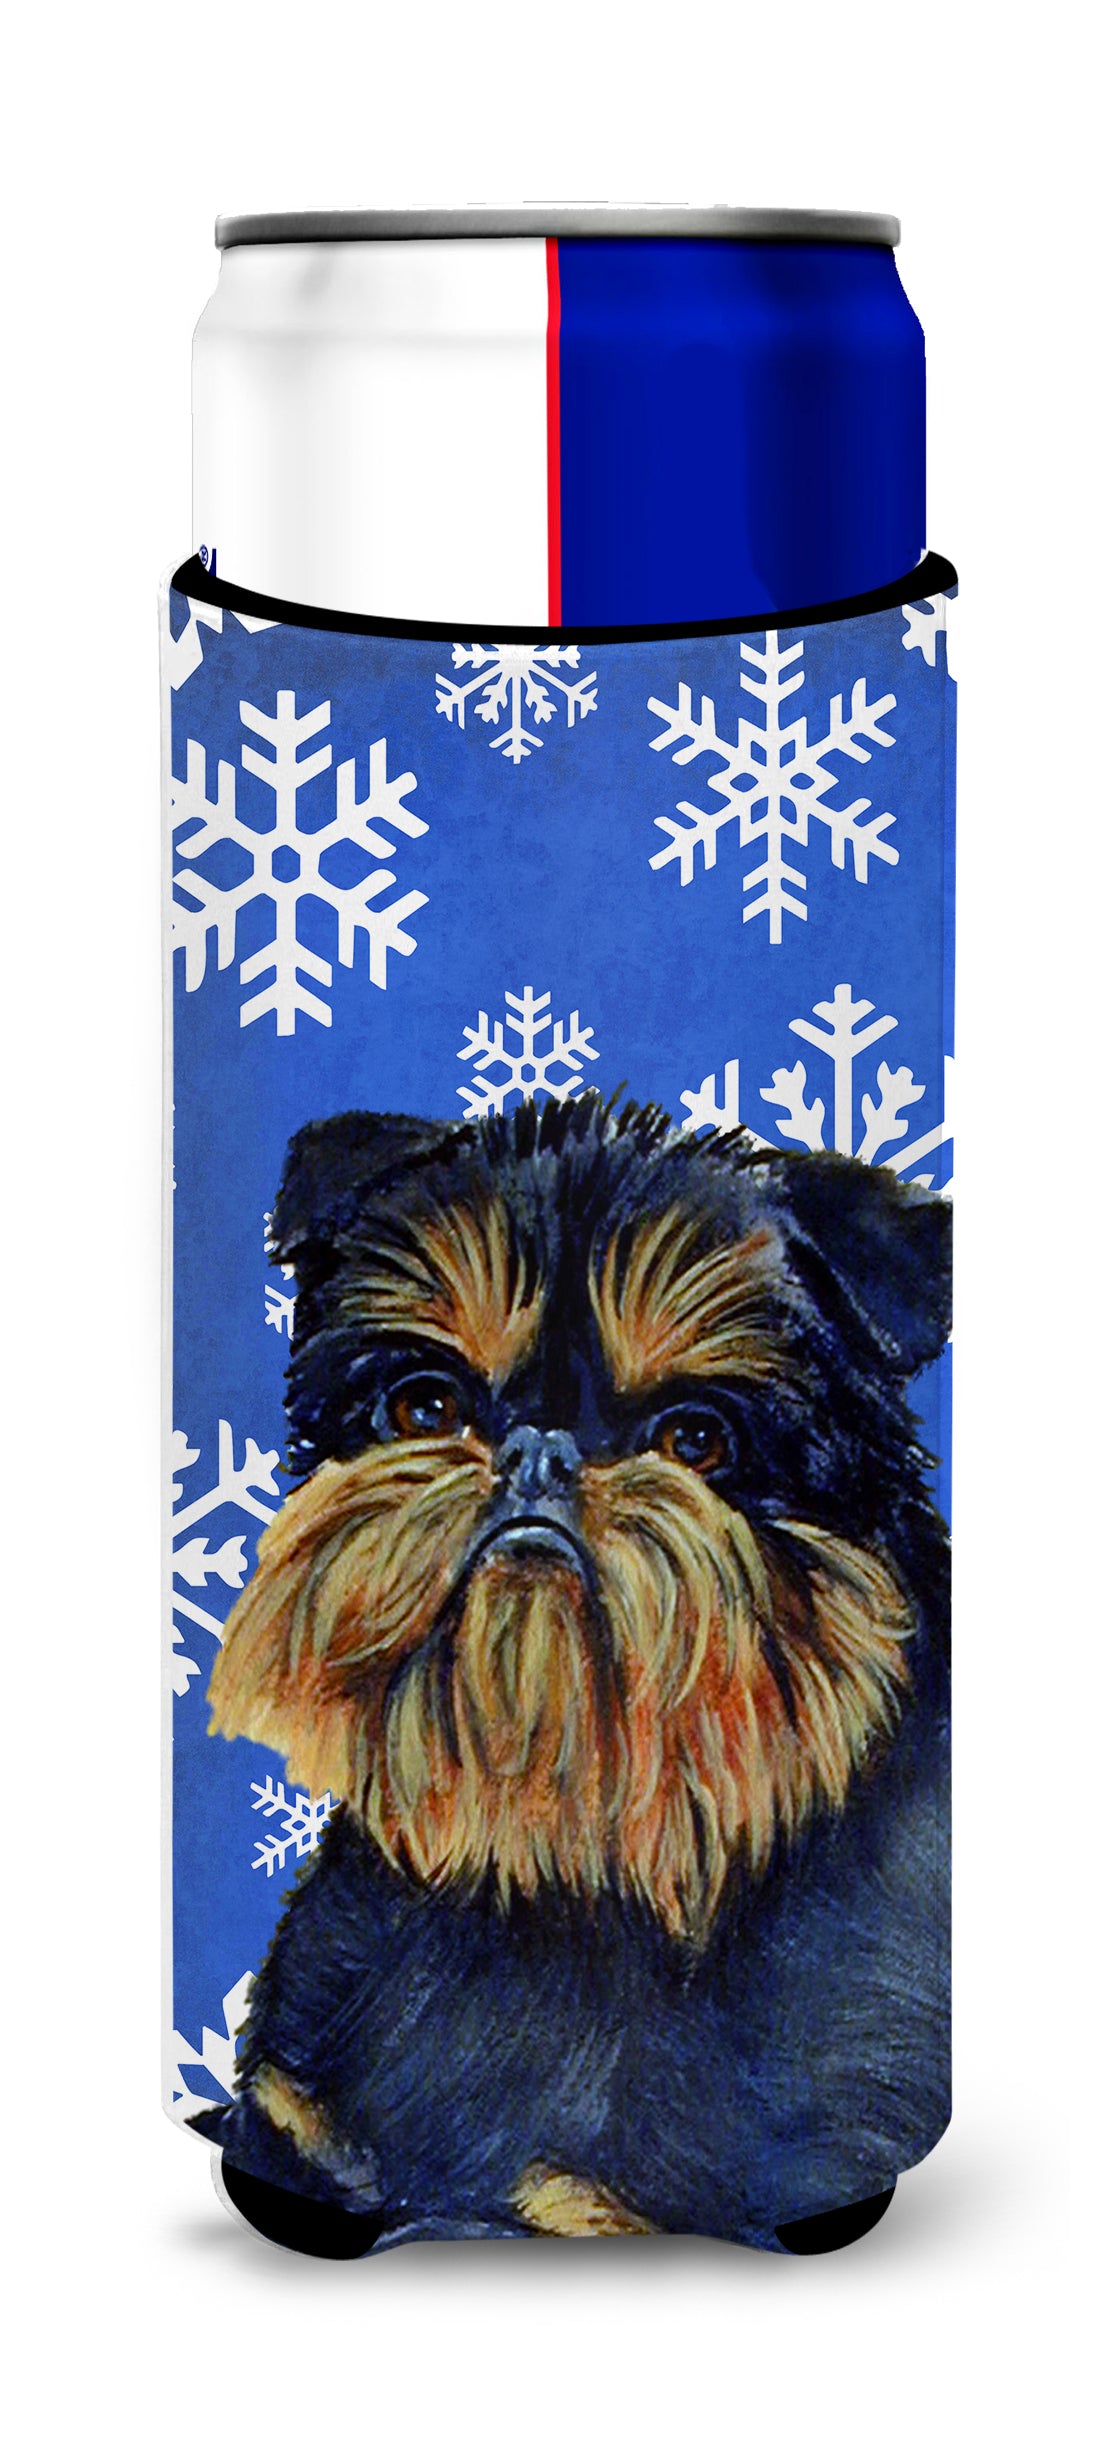 Brussels Griffon Winter Snowflakes Holiday Ultra Beverage Isolateurs pour canettes minces LH9298MUK